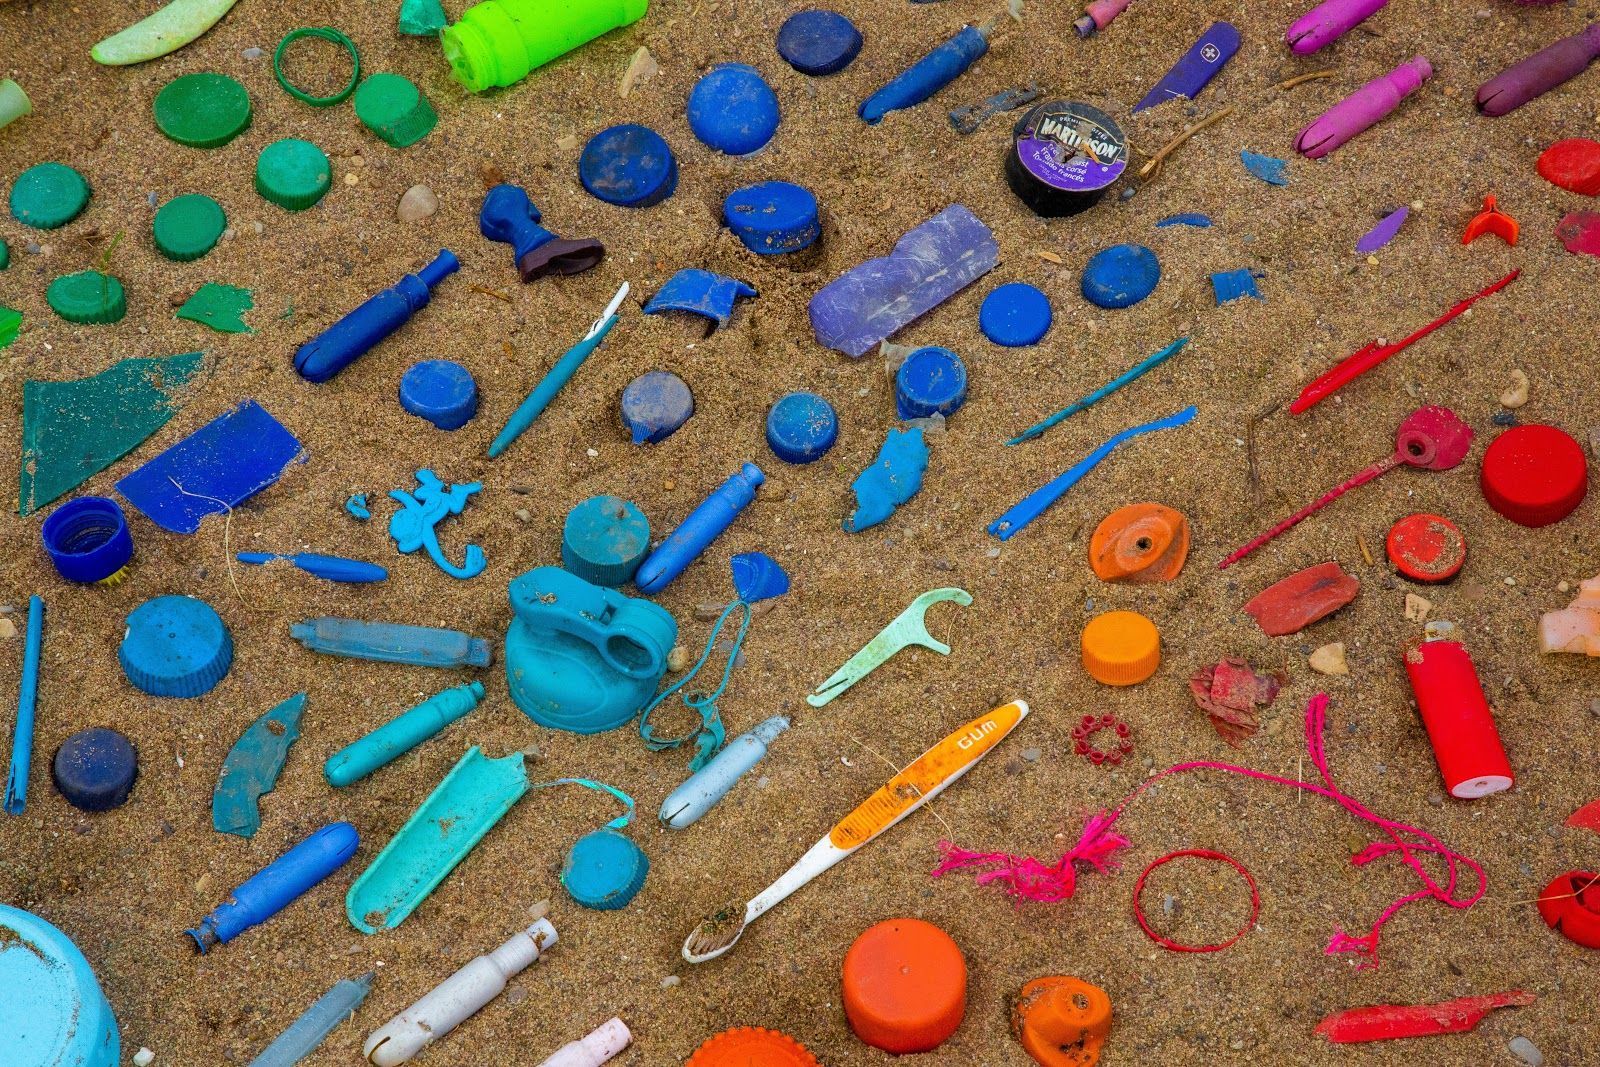 HOW TO BE A CONSCIOUS CONSUMER: THE FIGHT AGAINST PLASTICS